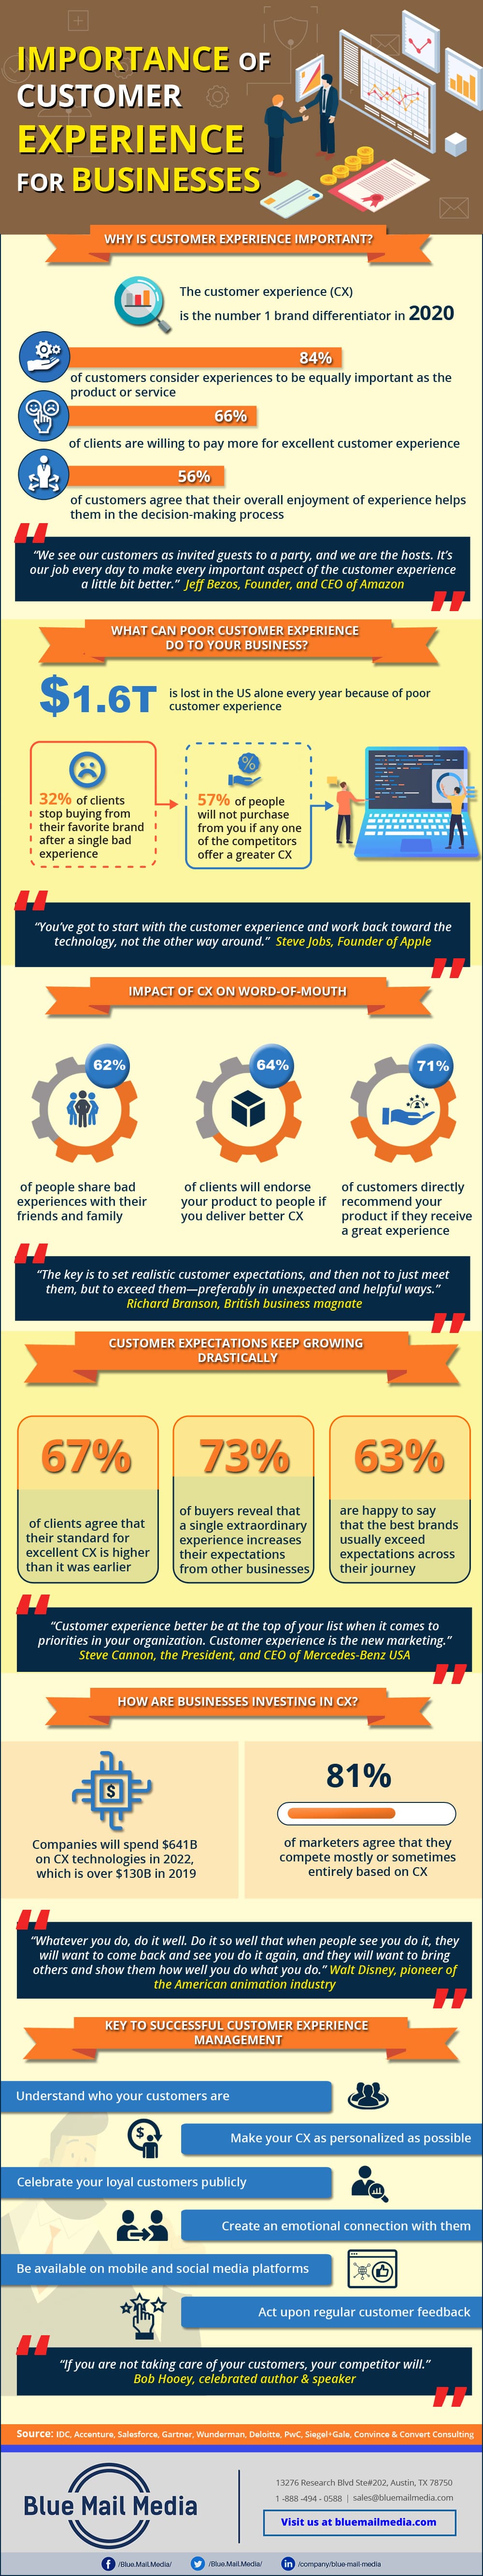 Importance of Customer Experience for Businesses